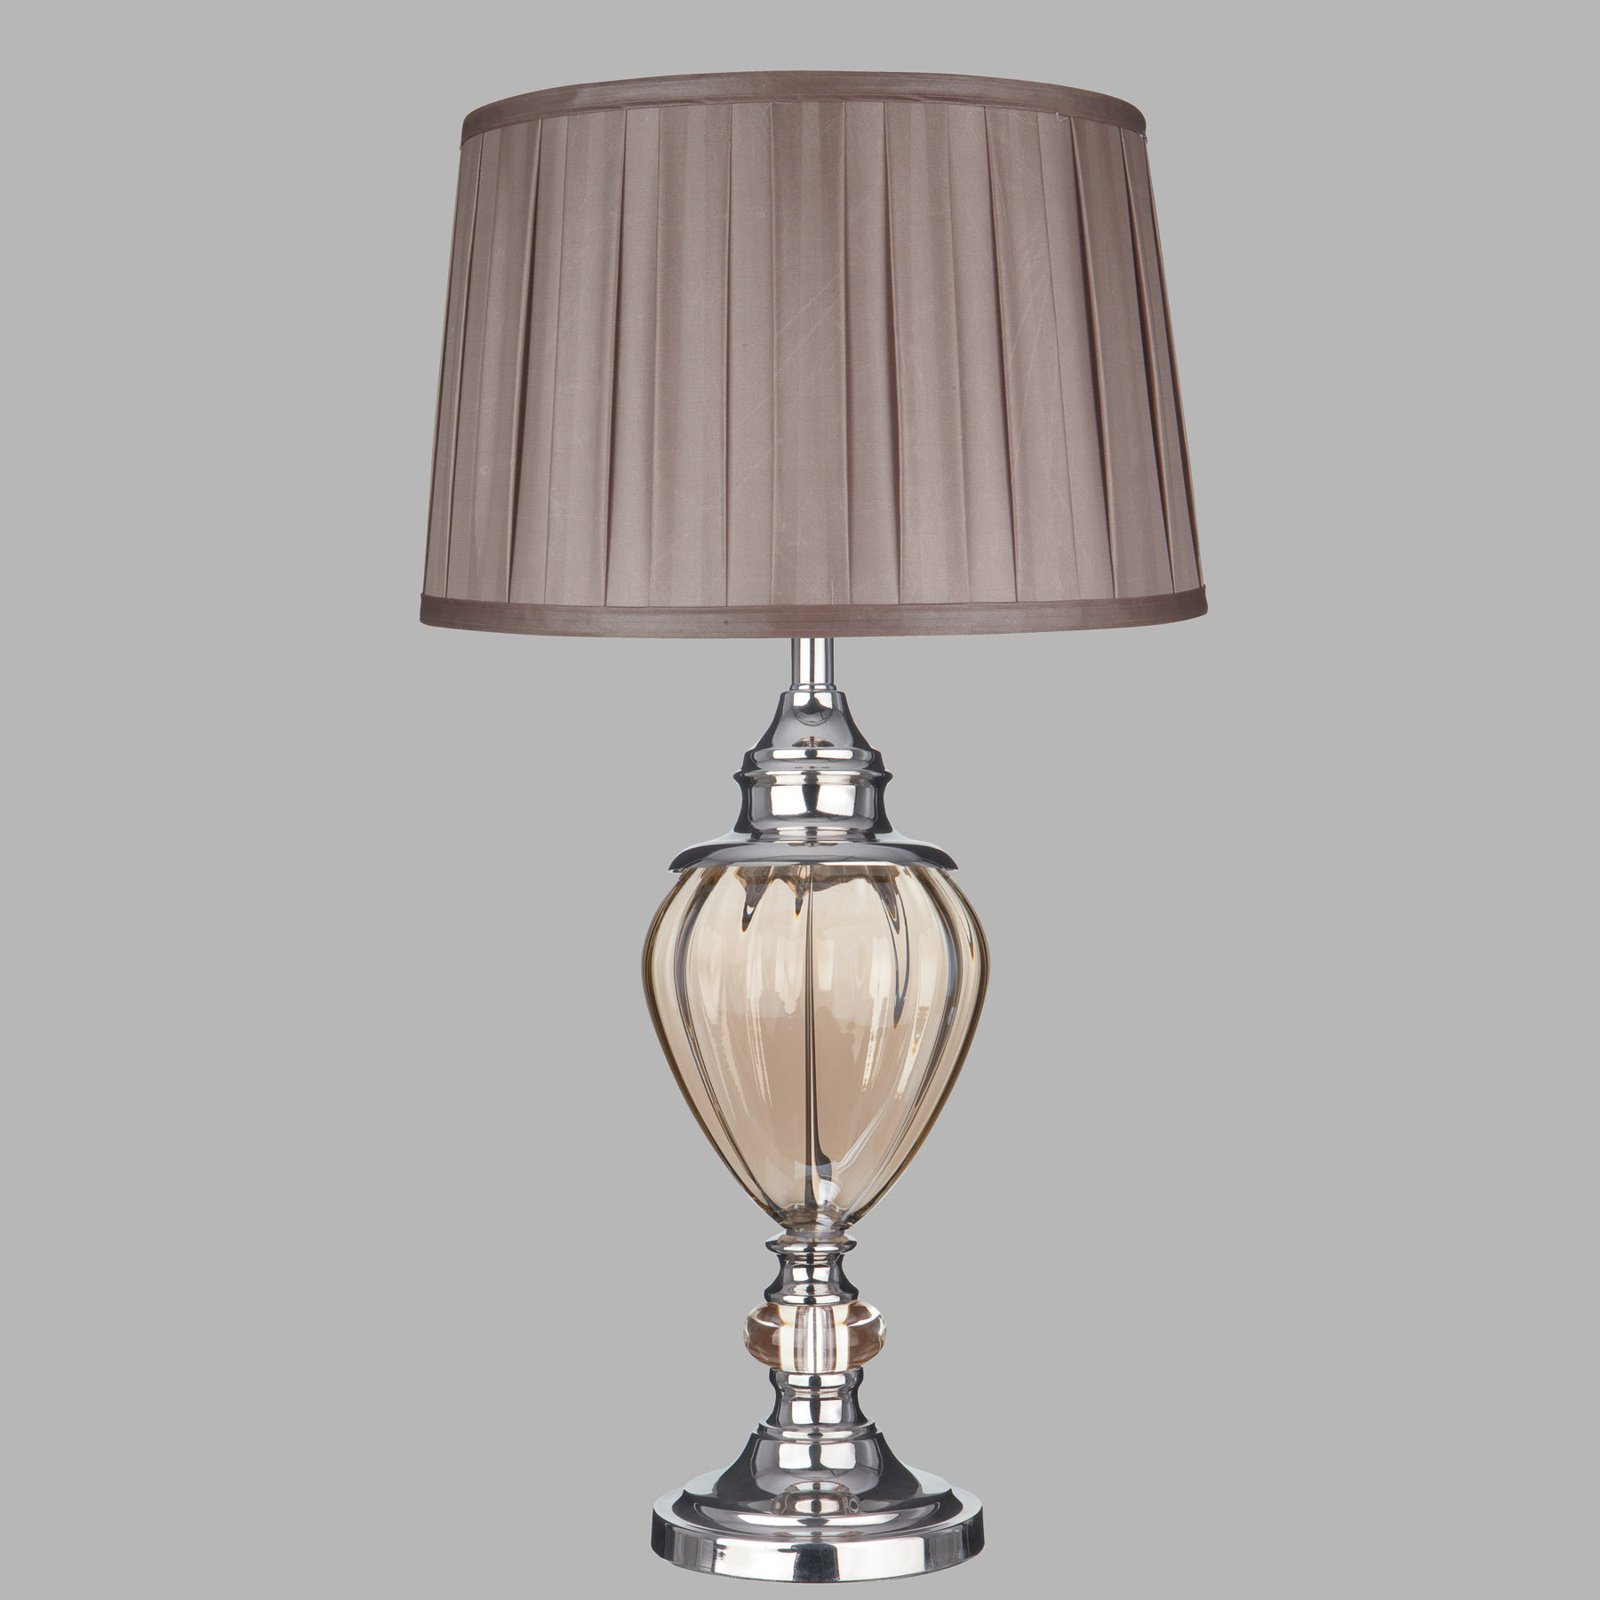 Greyson table lamp with fabric lampshade in brown